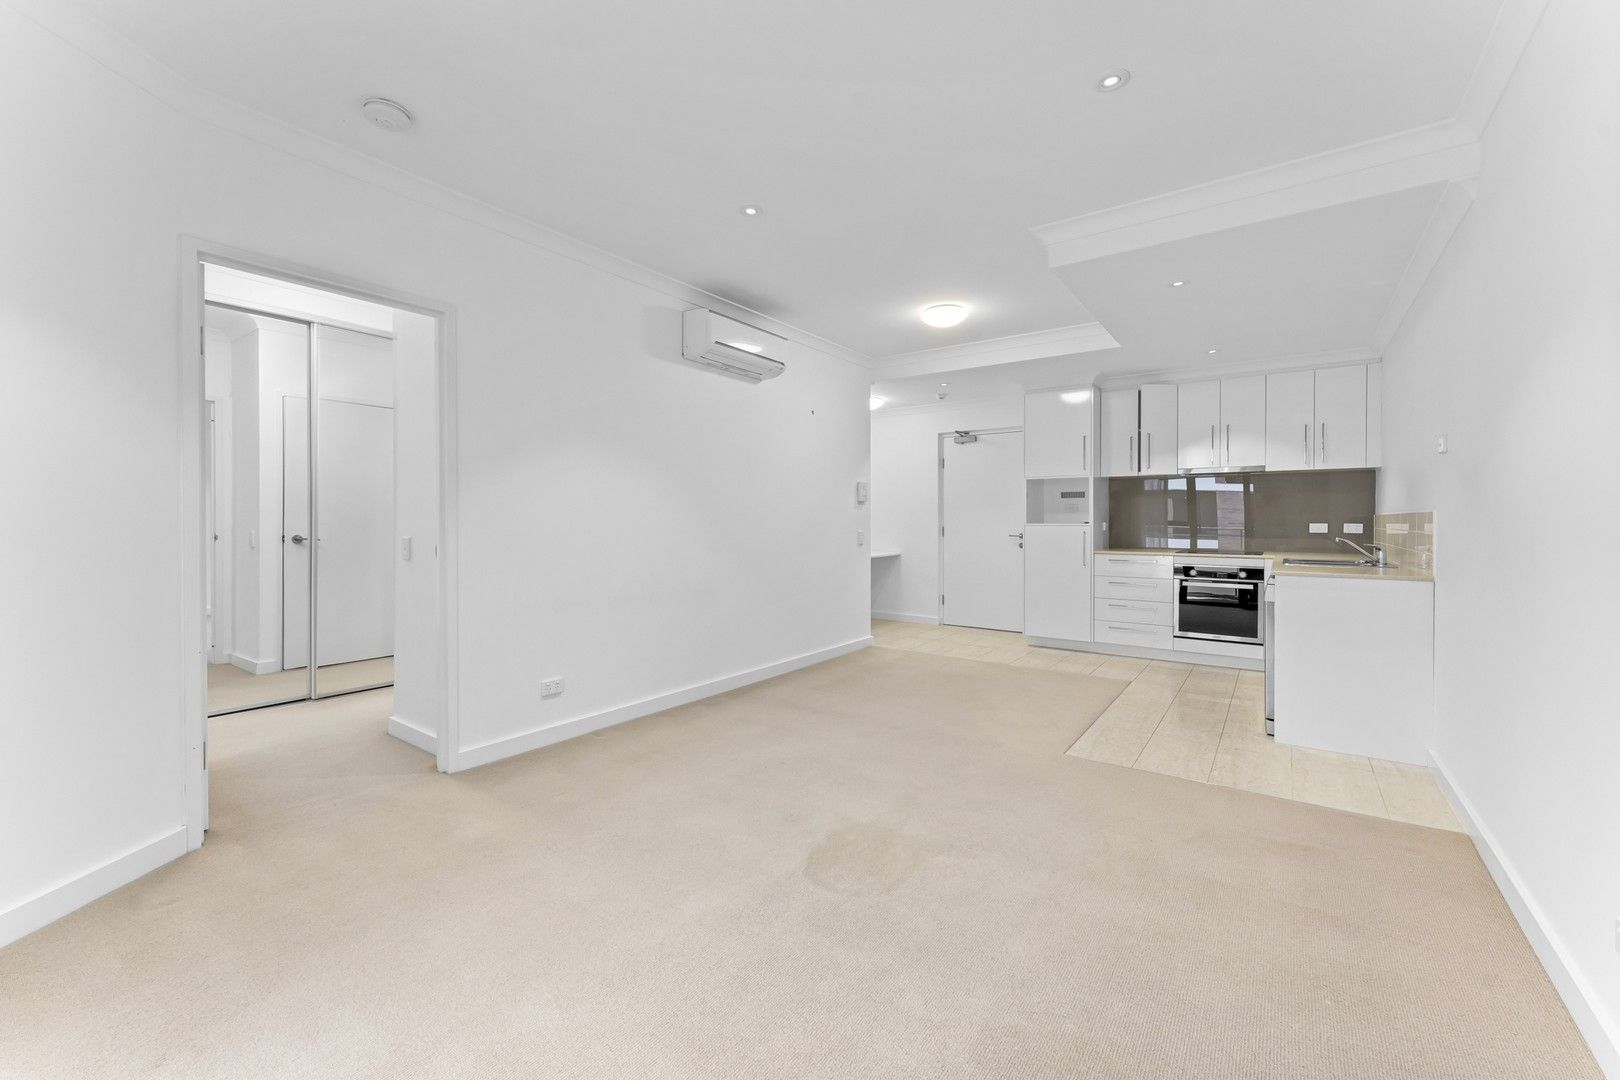 1 bedrooms Apartment / Unit / Flat in 211/1 Wexford St SUBIACO WA, 6008